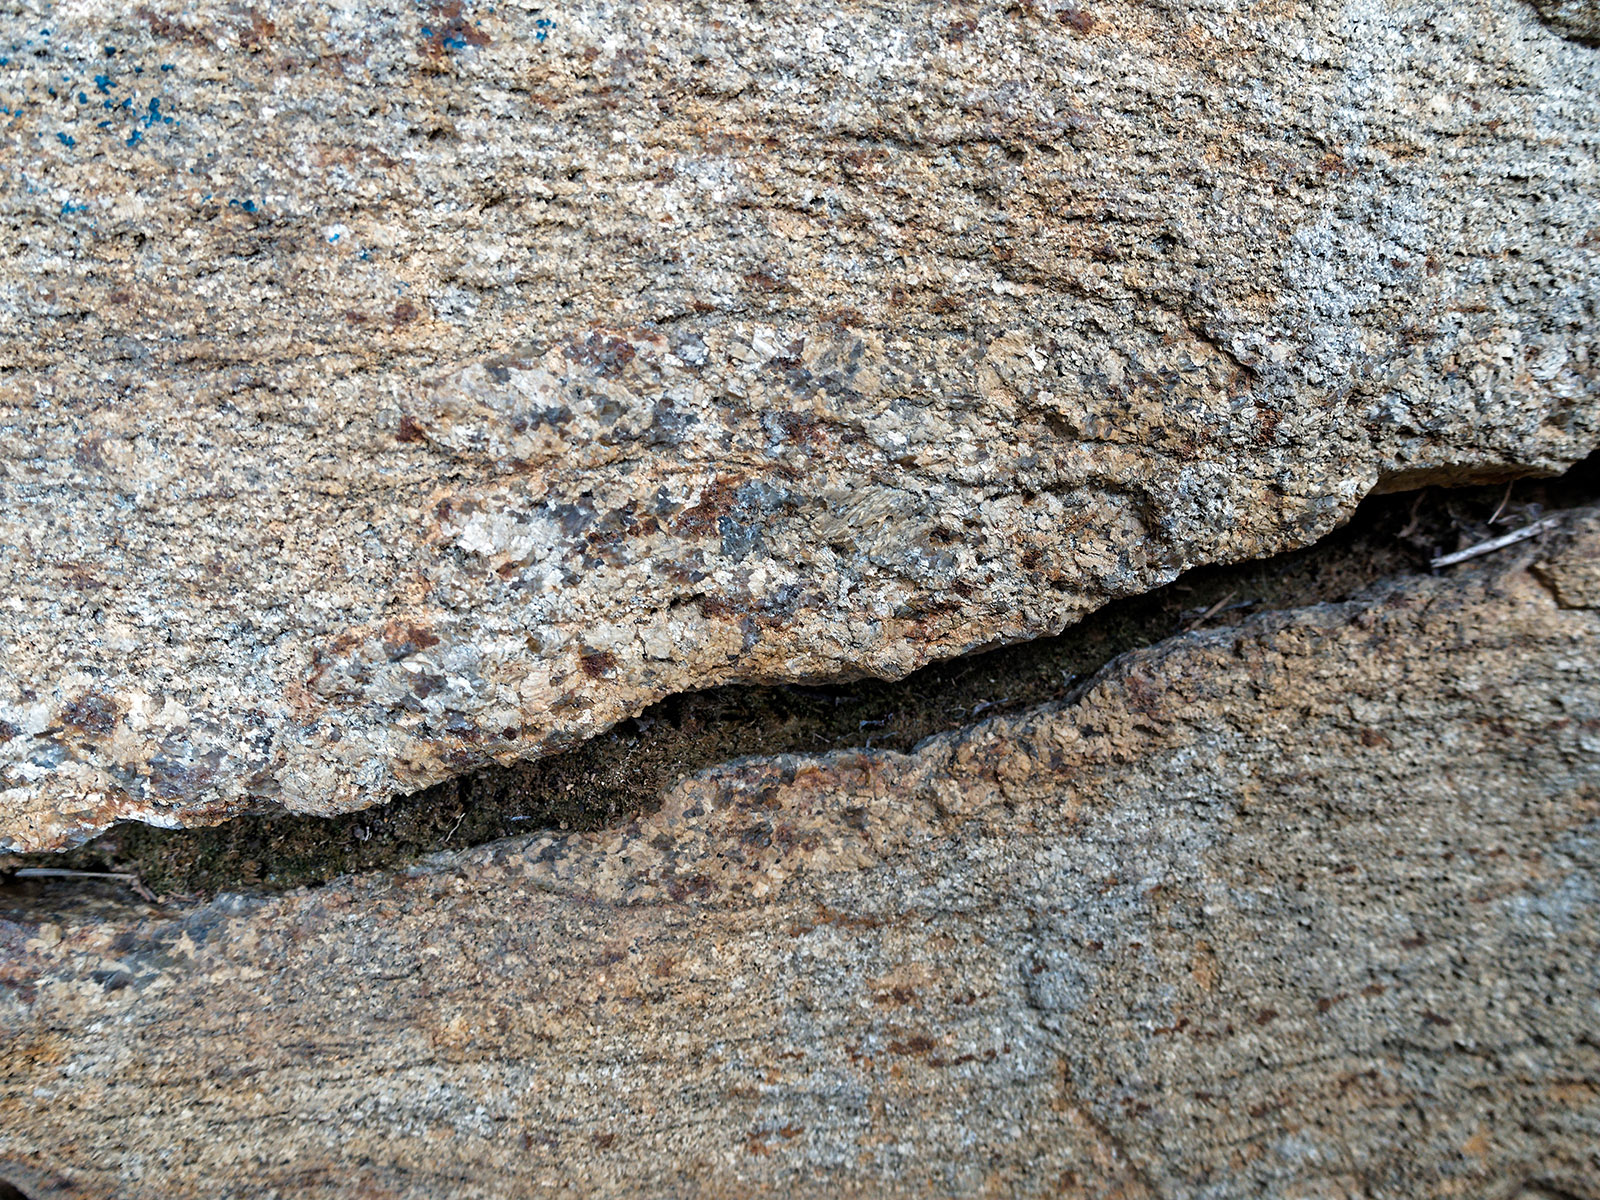 Close-up of highly weathered granite gneiss at Hazel Mountain Overlook.  Foliation of the rock can be seen.  The polygonal red structures with sharp borders are garnets.  Garnets form after the original rock is under heat and pressure during metamorphism, and rock chemicals are modified to a more stable form.